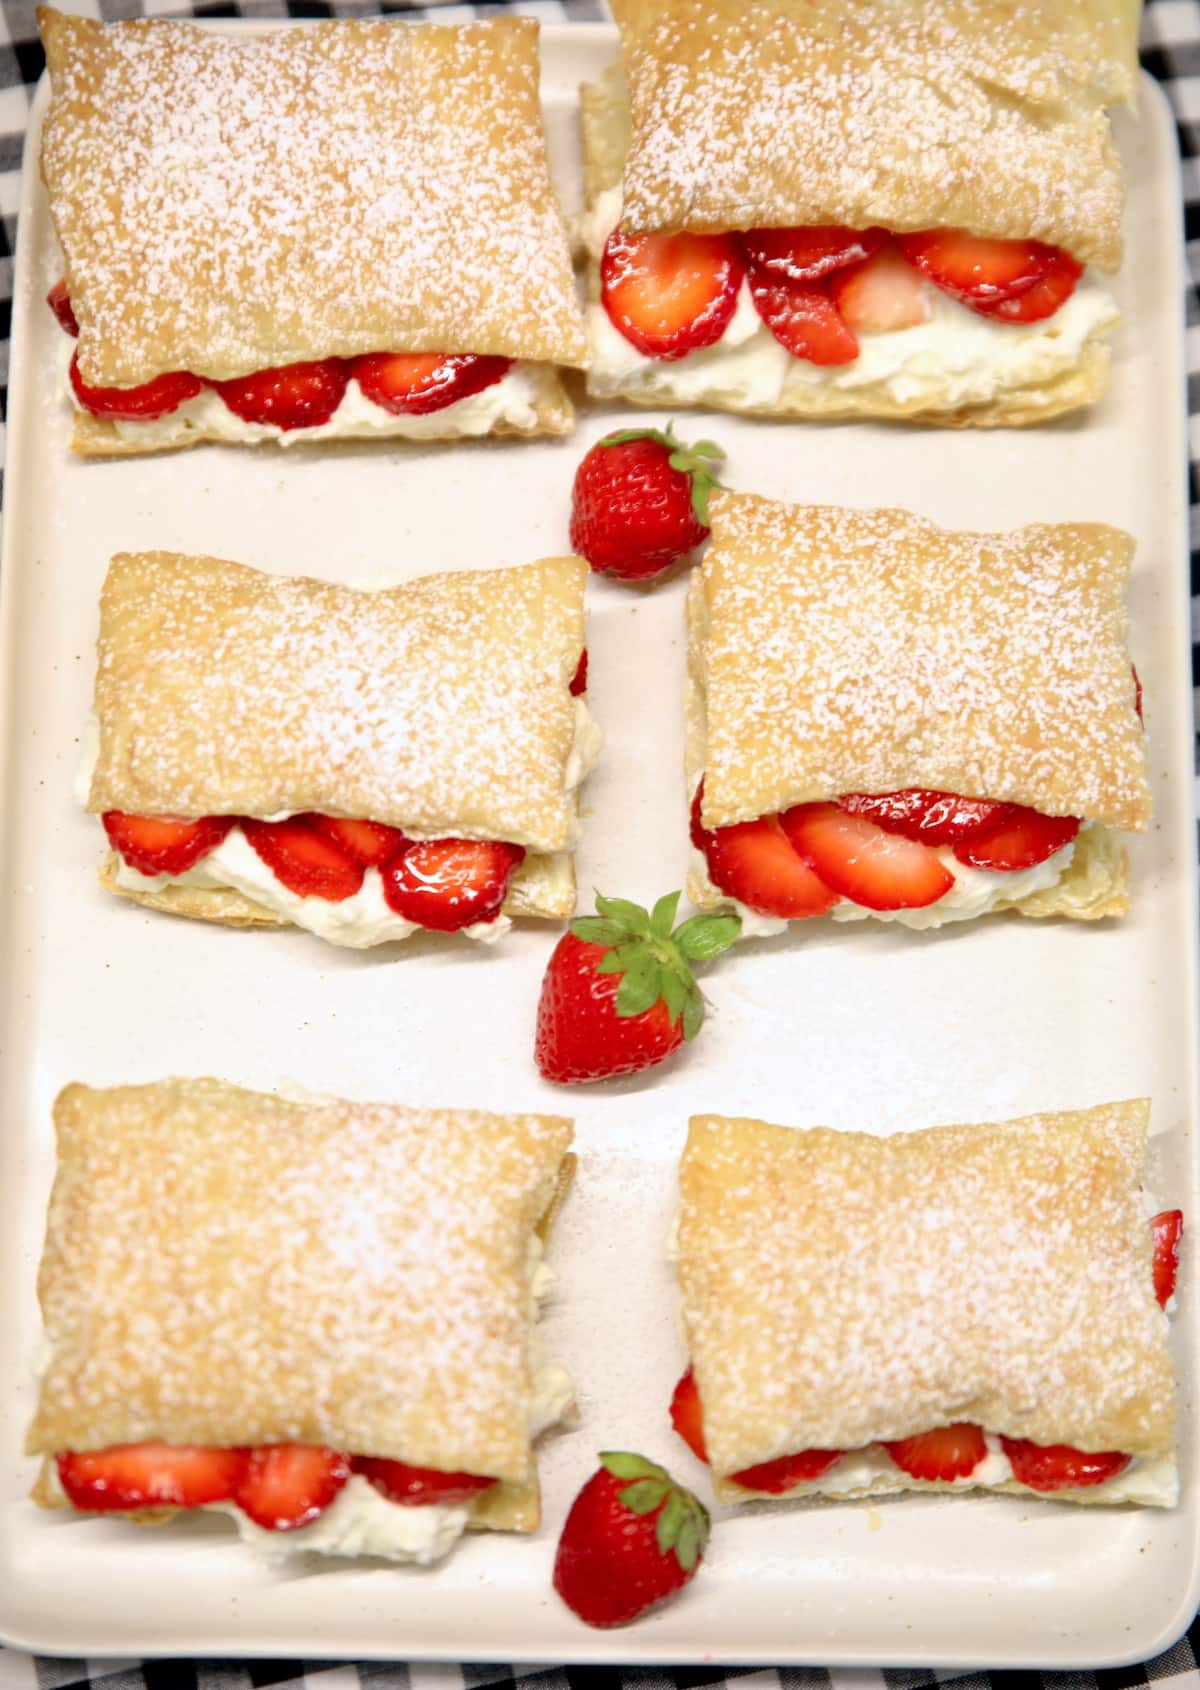 6 puff pastries with strawberry and cream filling.